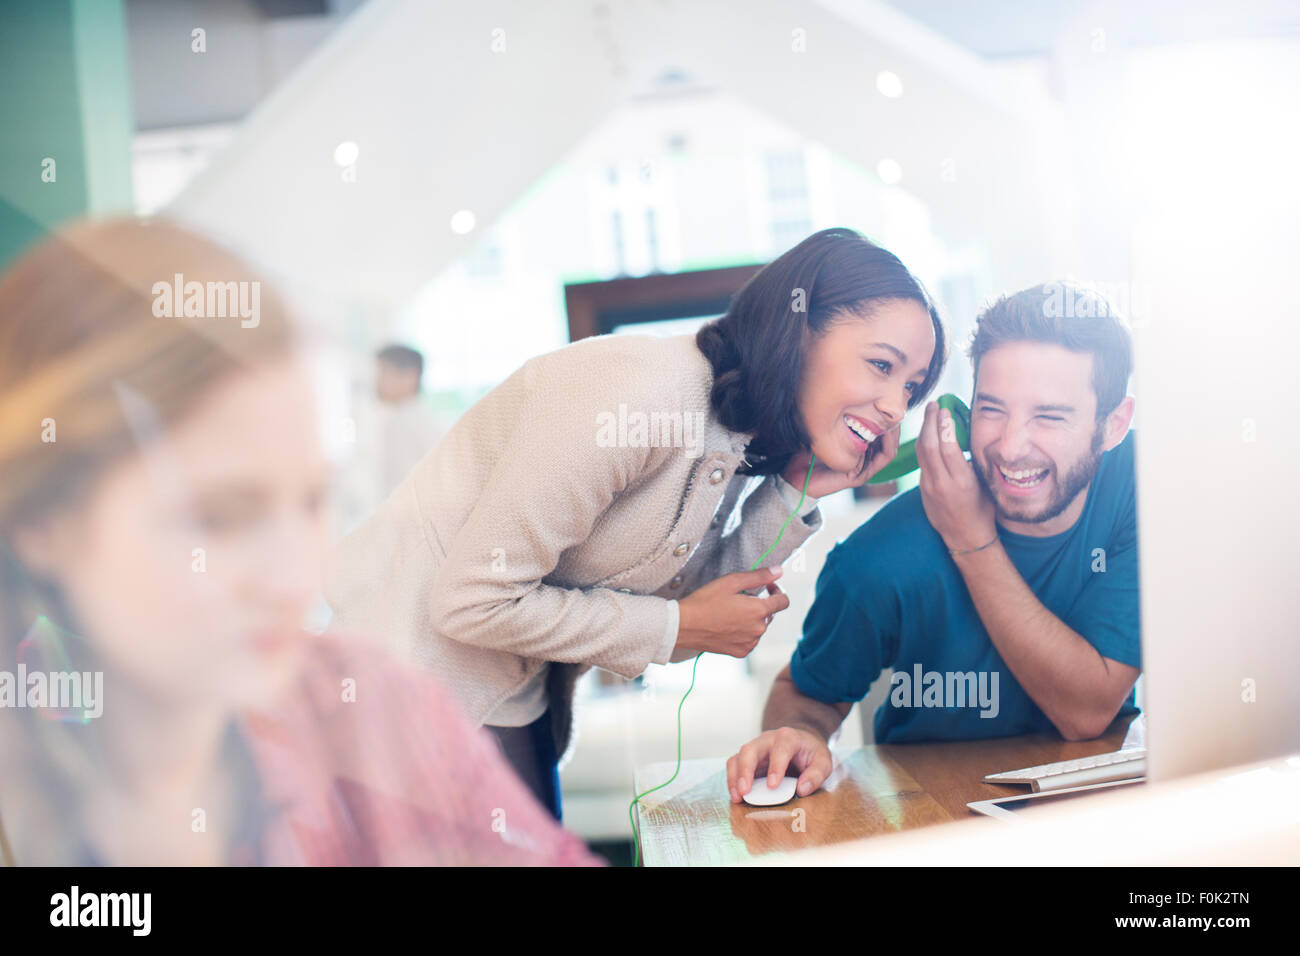 Creative business people sharing and listening to headphones in office Stock Photo